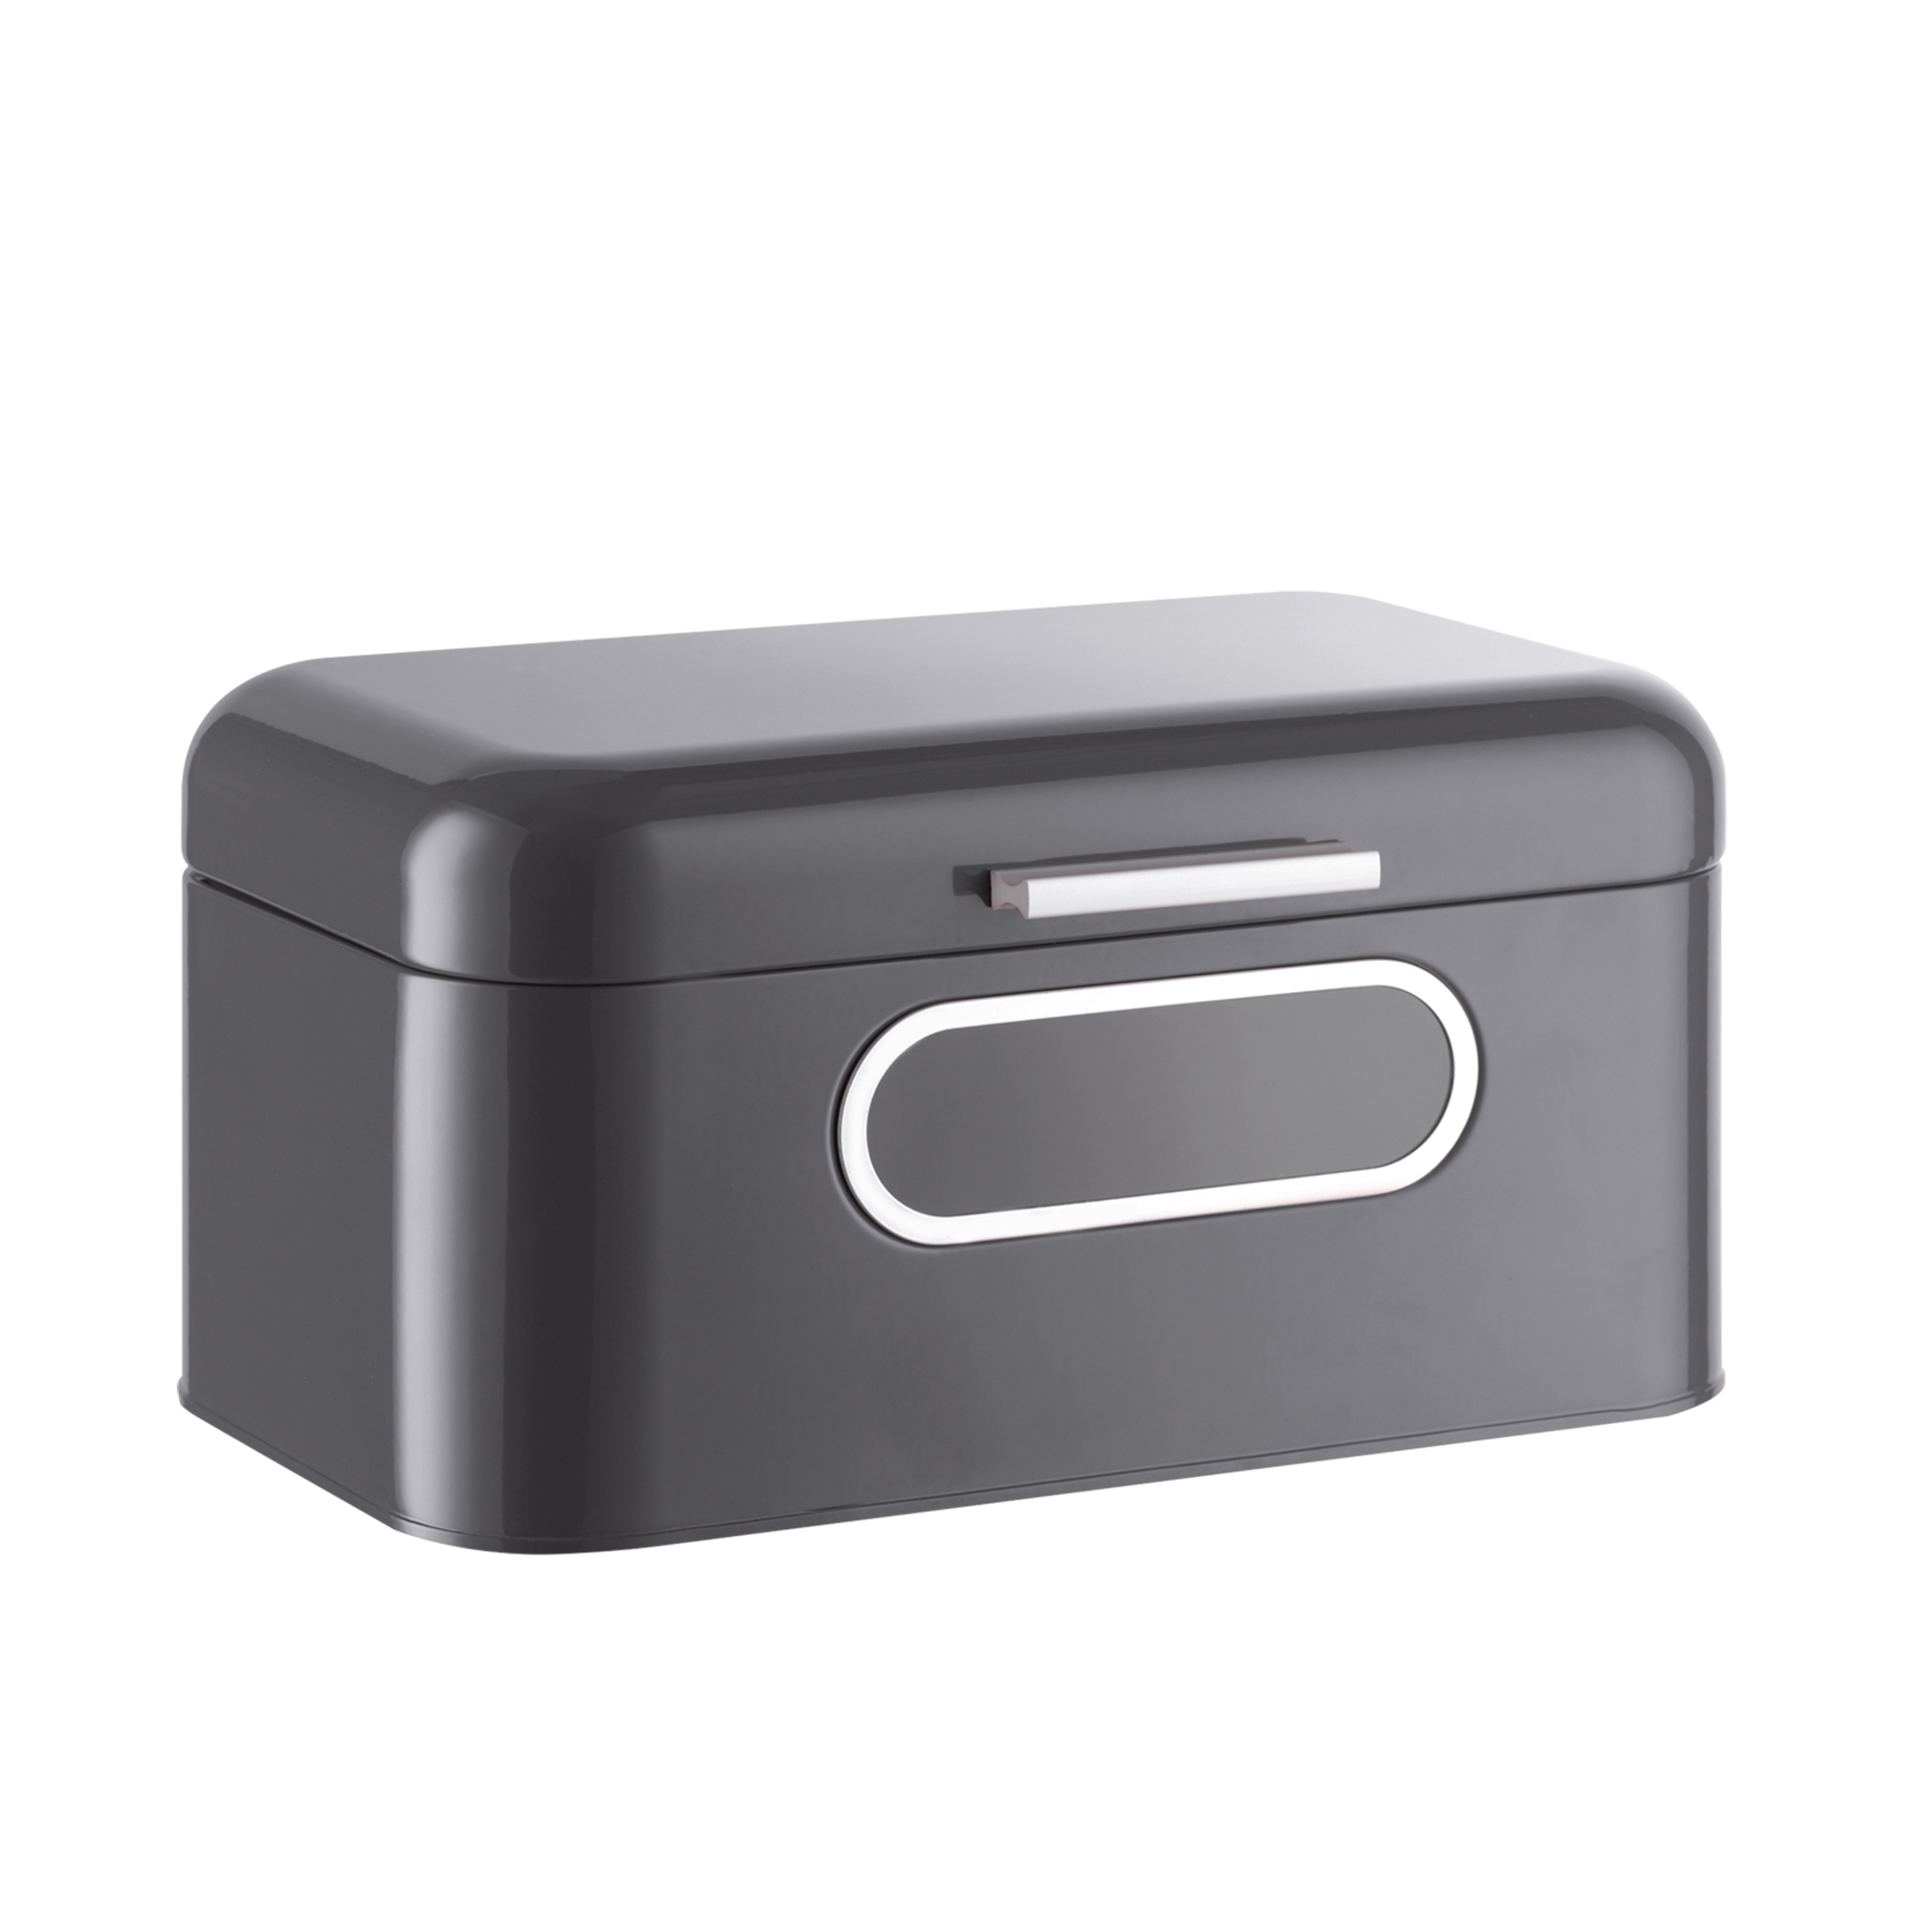 Bread Box for Kitchen Countertop - Black Bread Bin Storage Container with Lid for Loaves, Pastries, and More